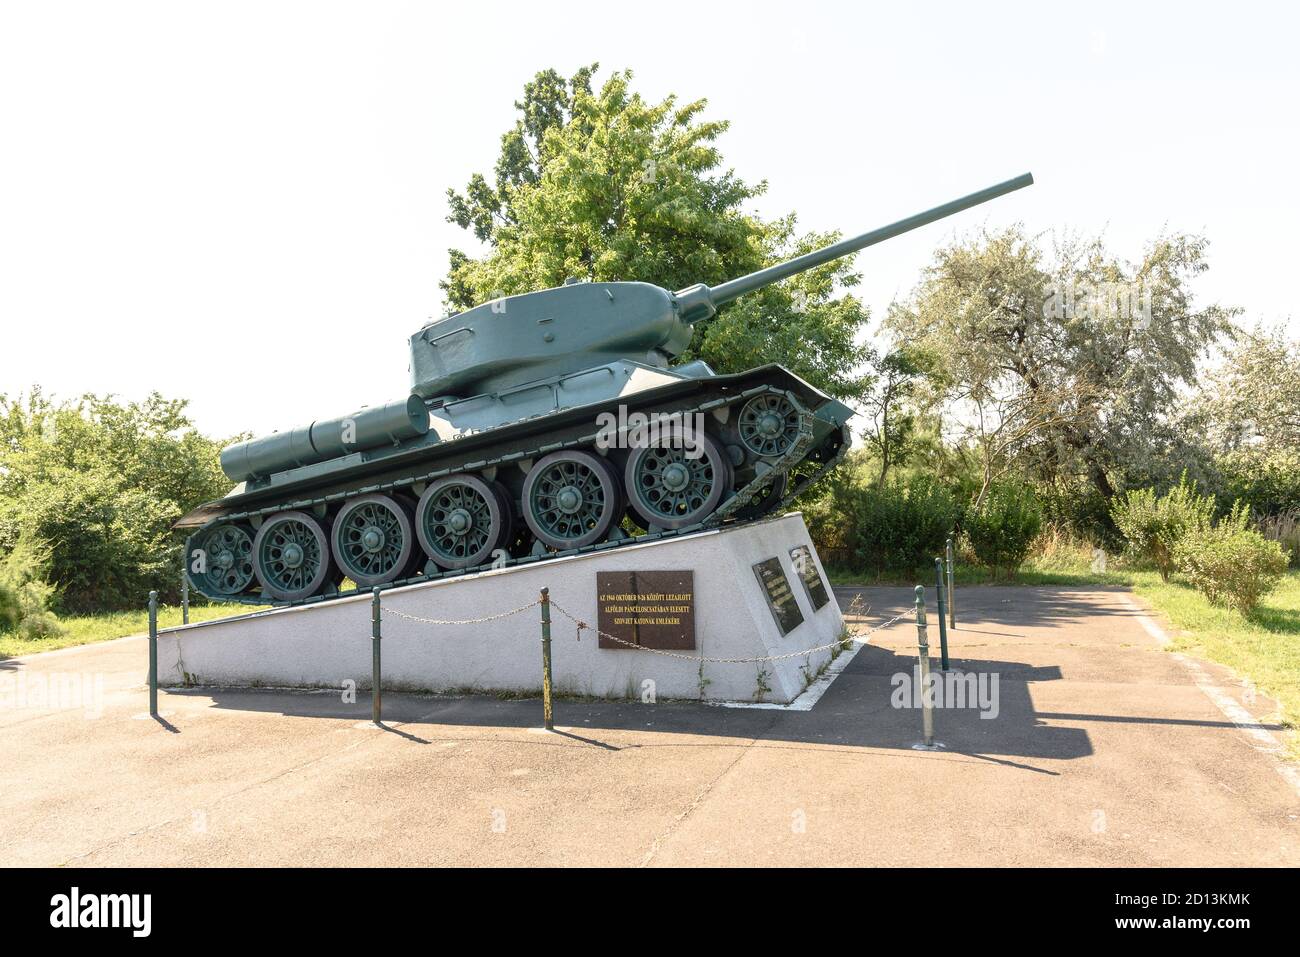 The Soviet War Memorial featuring a T-34 tank in Hortobagy, Hungary Stock Photo